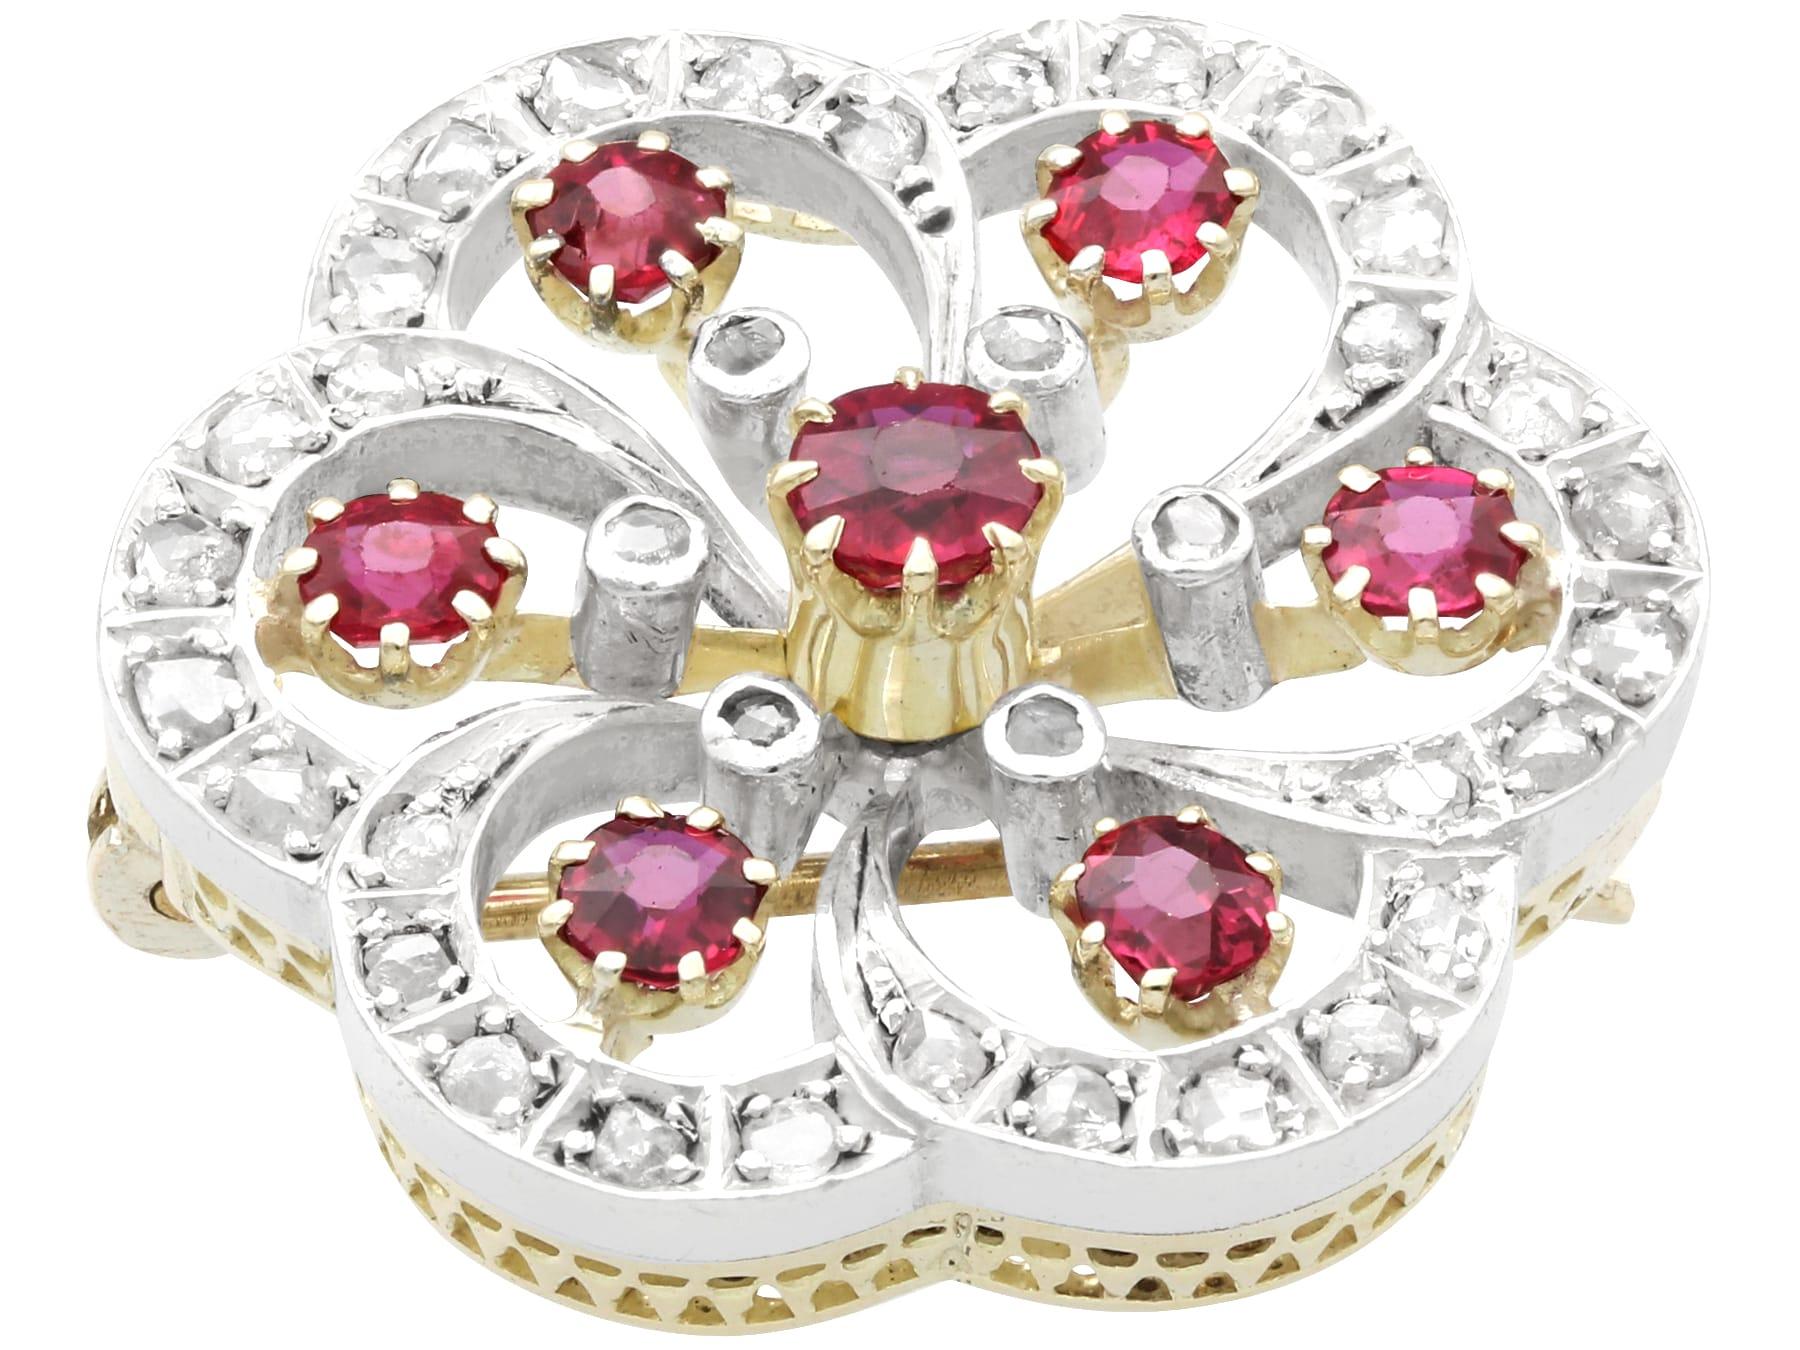 Antique 1.50Ct Ruby and 0.60Ct Diamond 12k Yellow Gold Flower Brooch Circa 1890 In Excellent Condition For Sale In Jesmond, Newcastle Upon Tyne